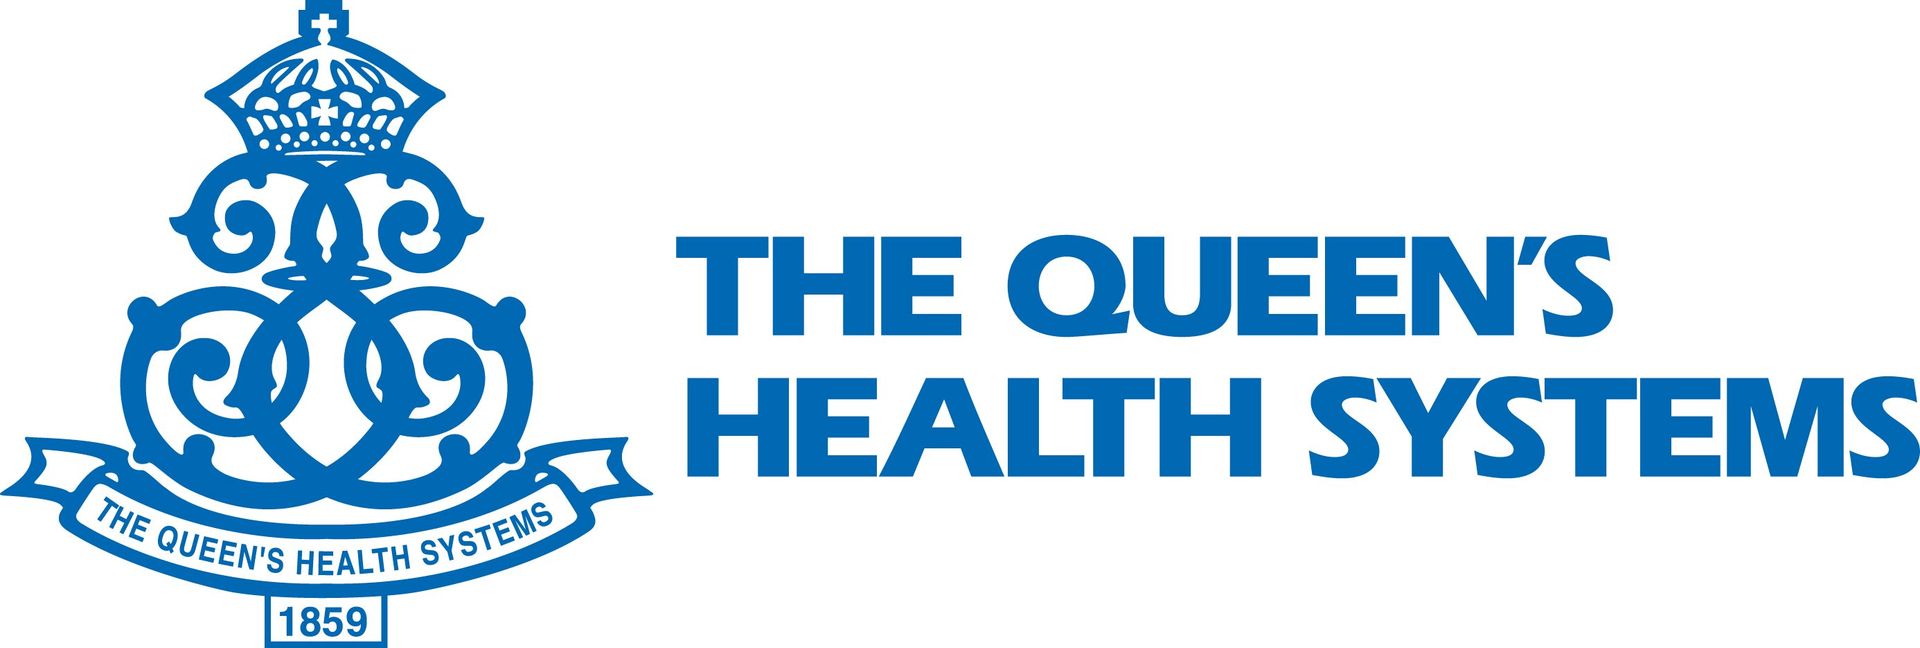 The queens health System